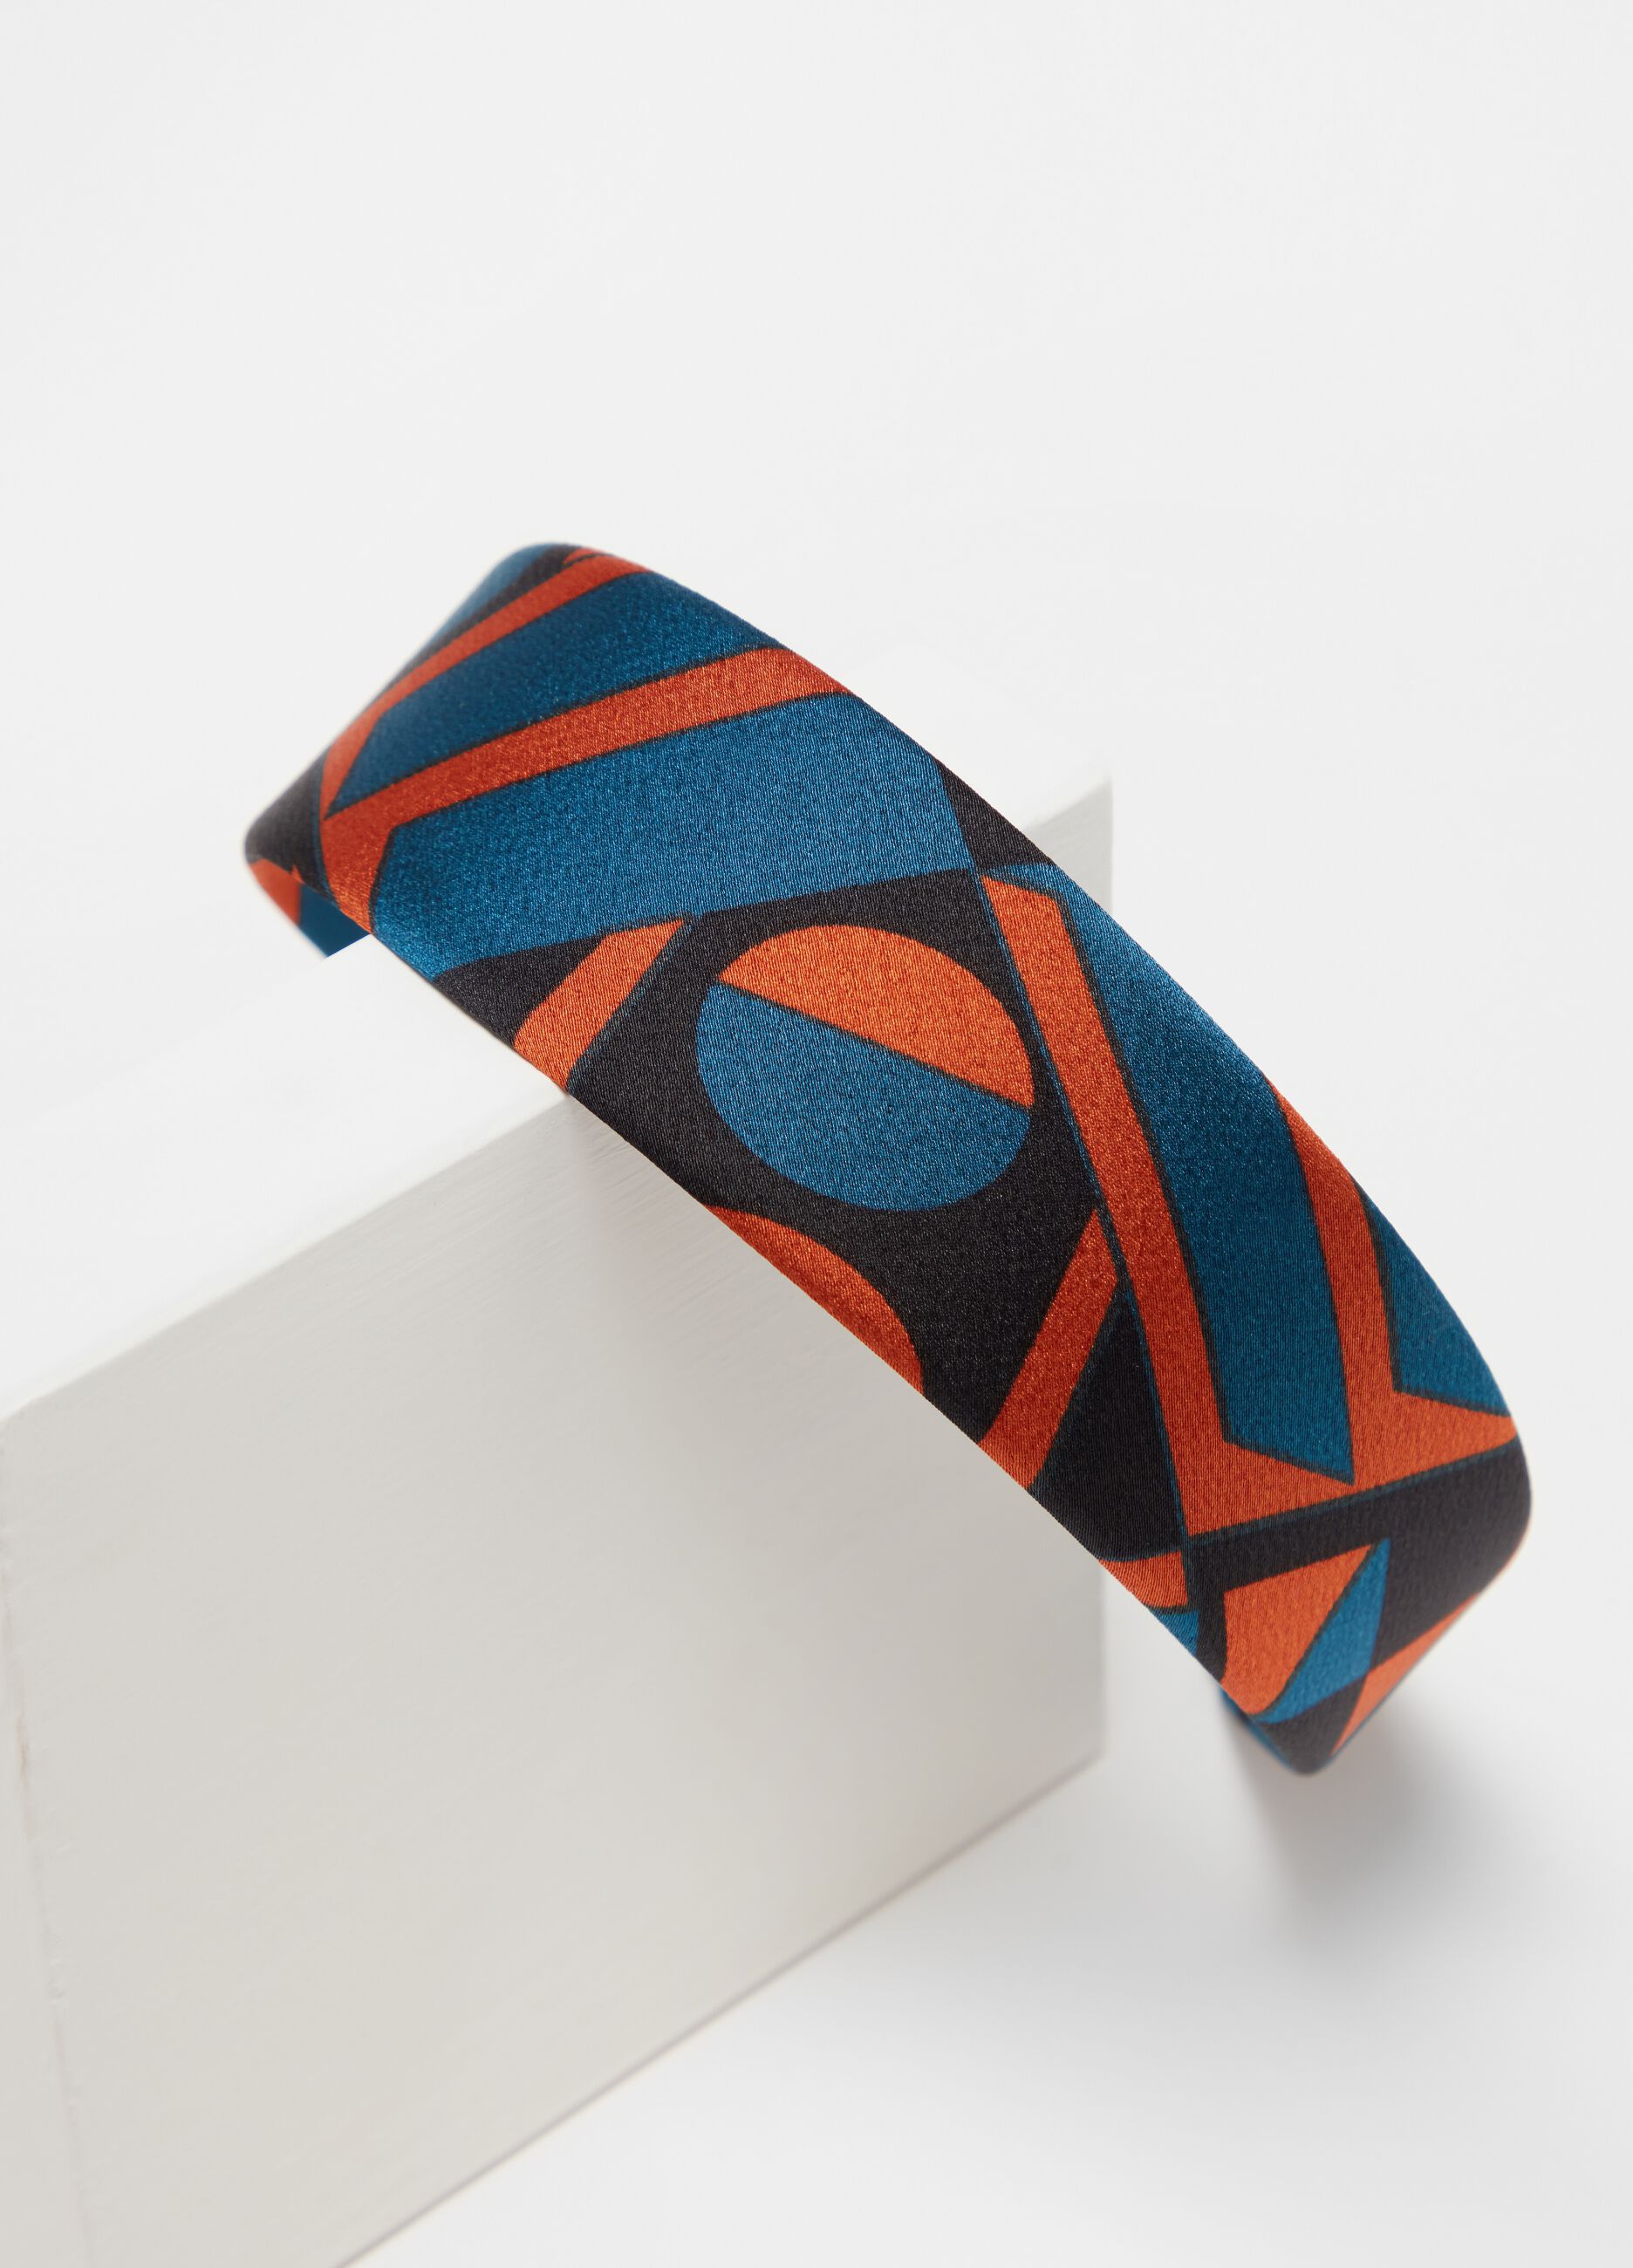 Alice band in patterned fabric